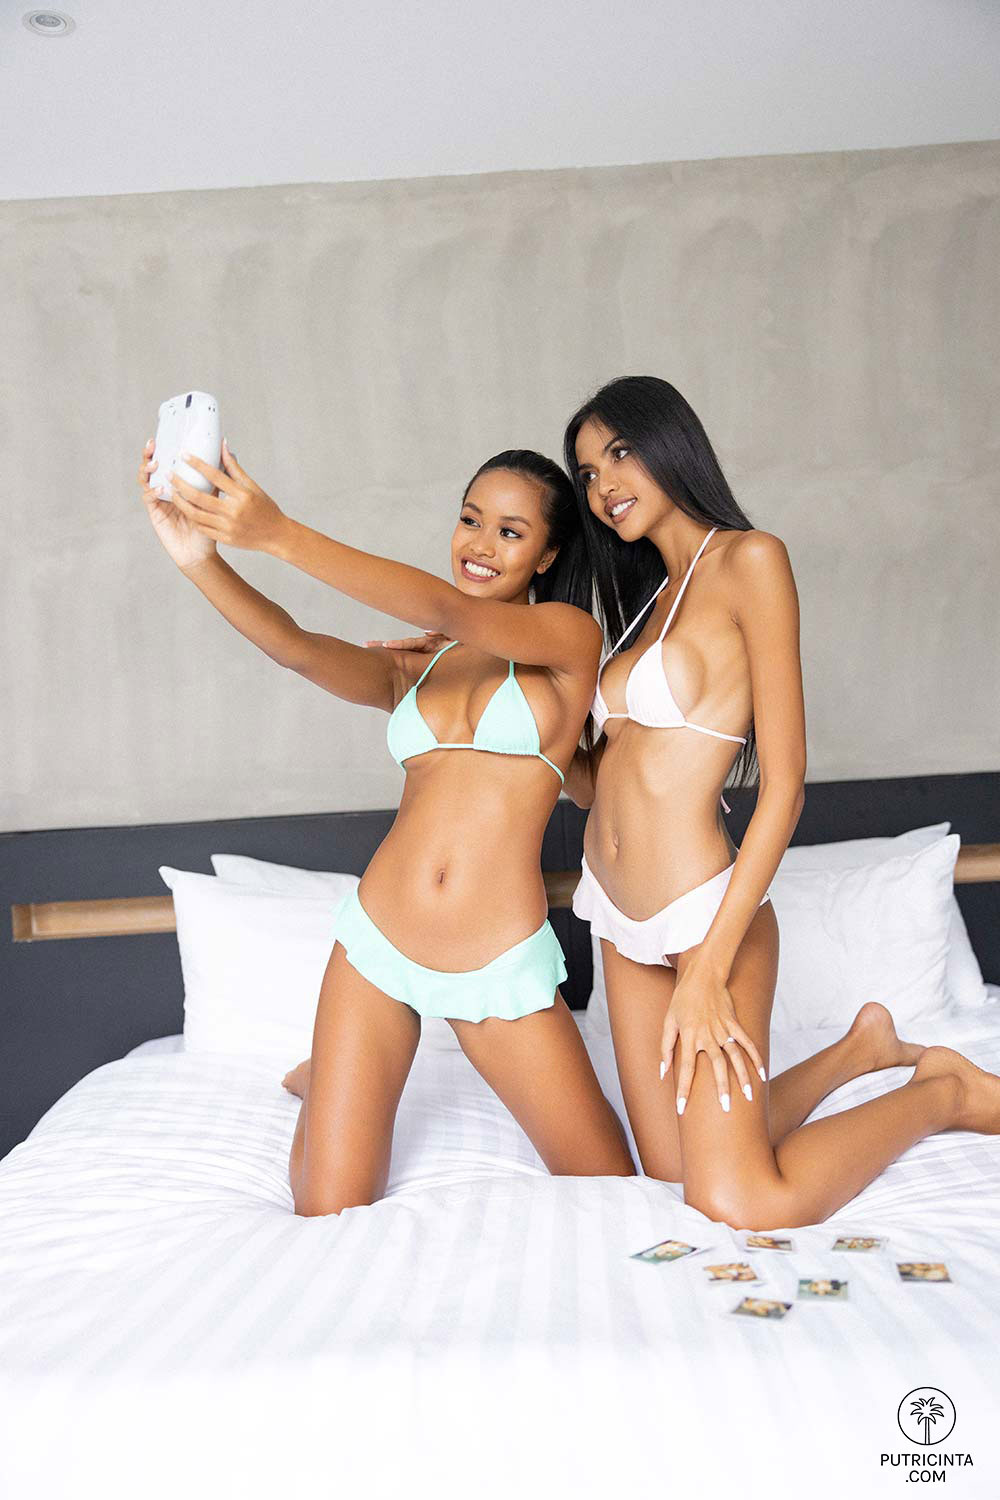 Putri Cinta Posing with her Friend in Bed